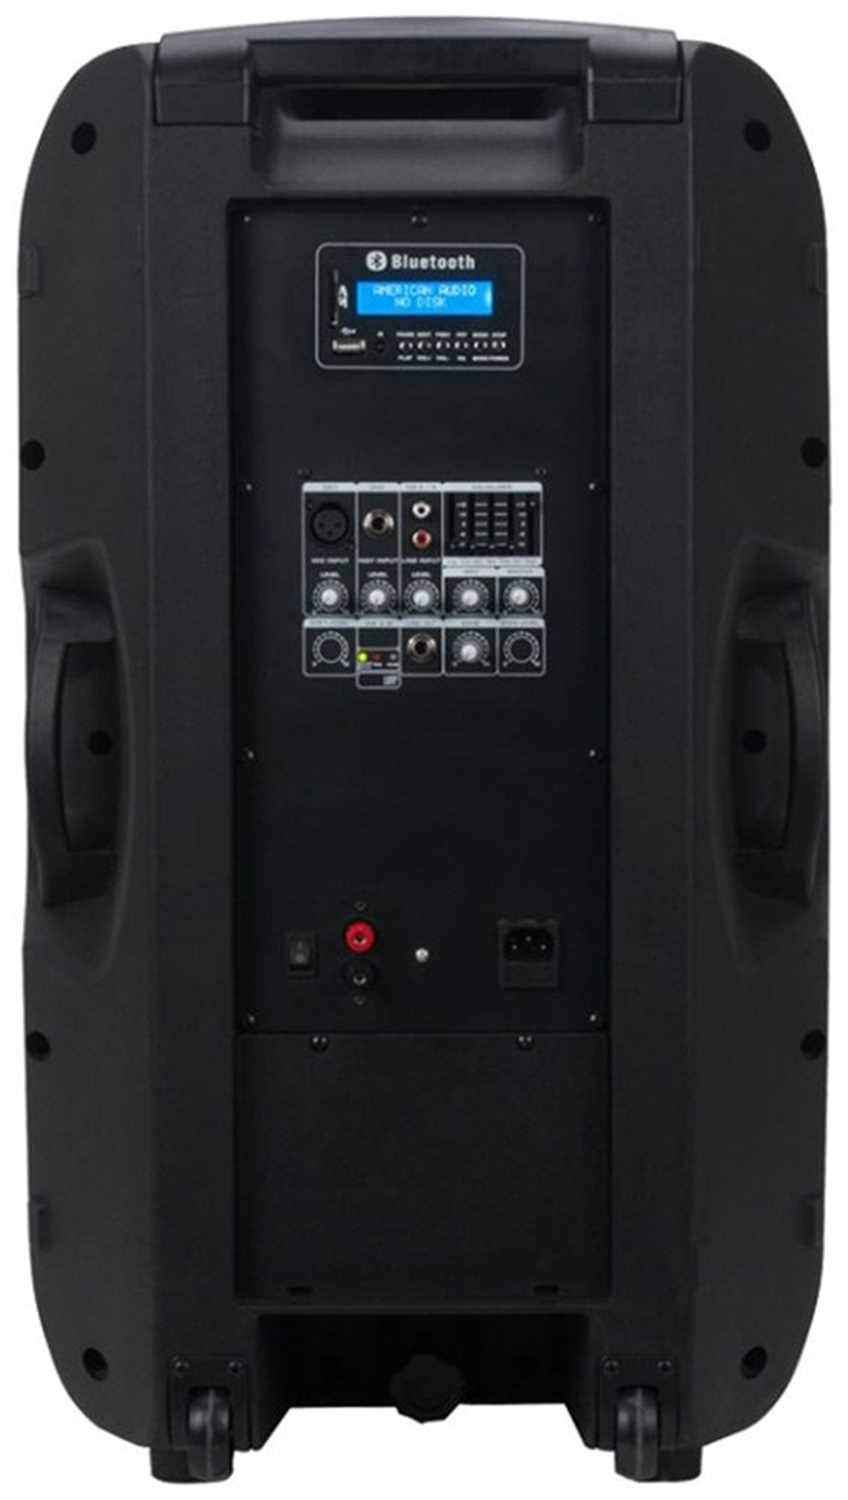 American Audio ELS-GO 15BT Battery-Powered Speakers with Gator Stands - PSSL ProSound and Stage Lighting